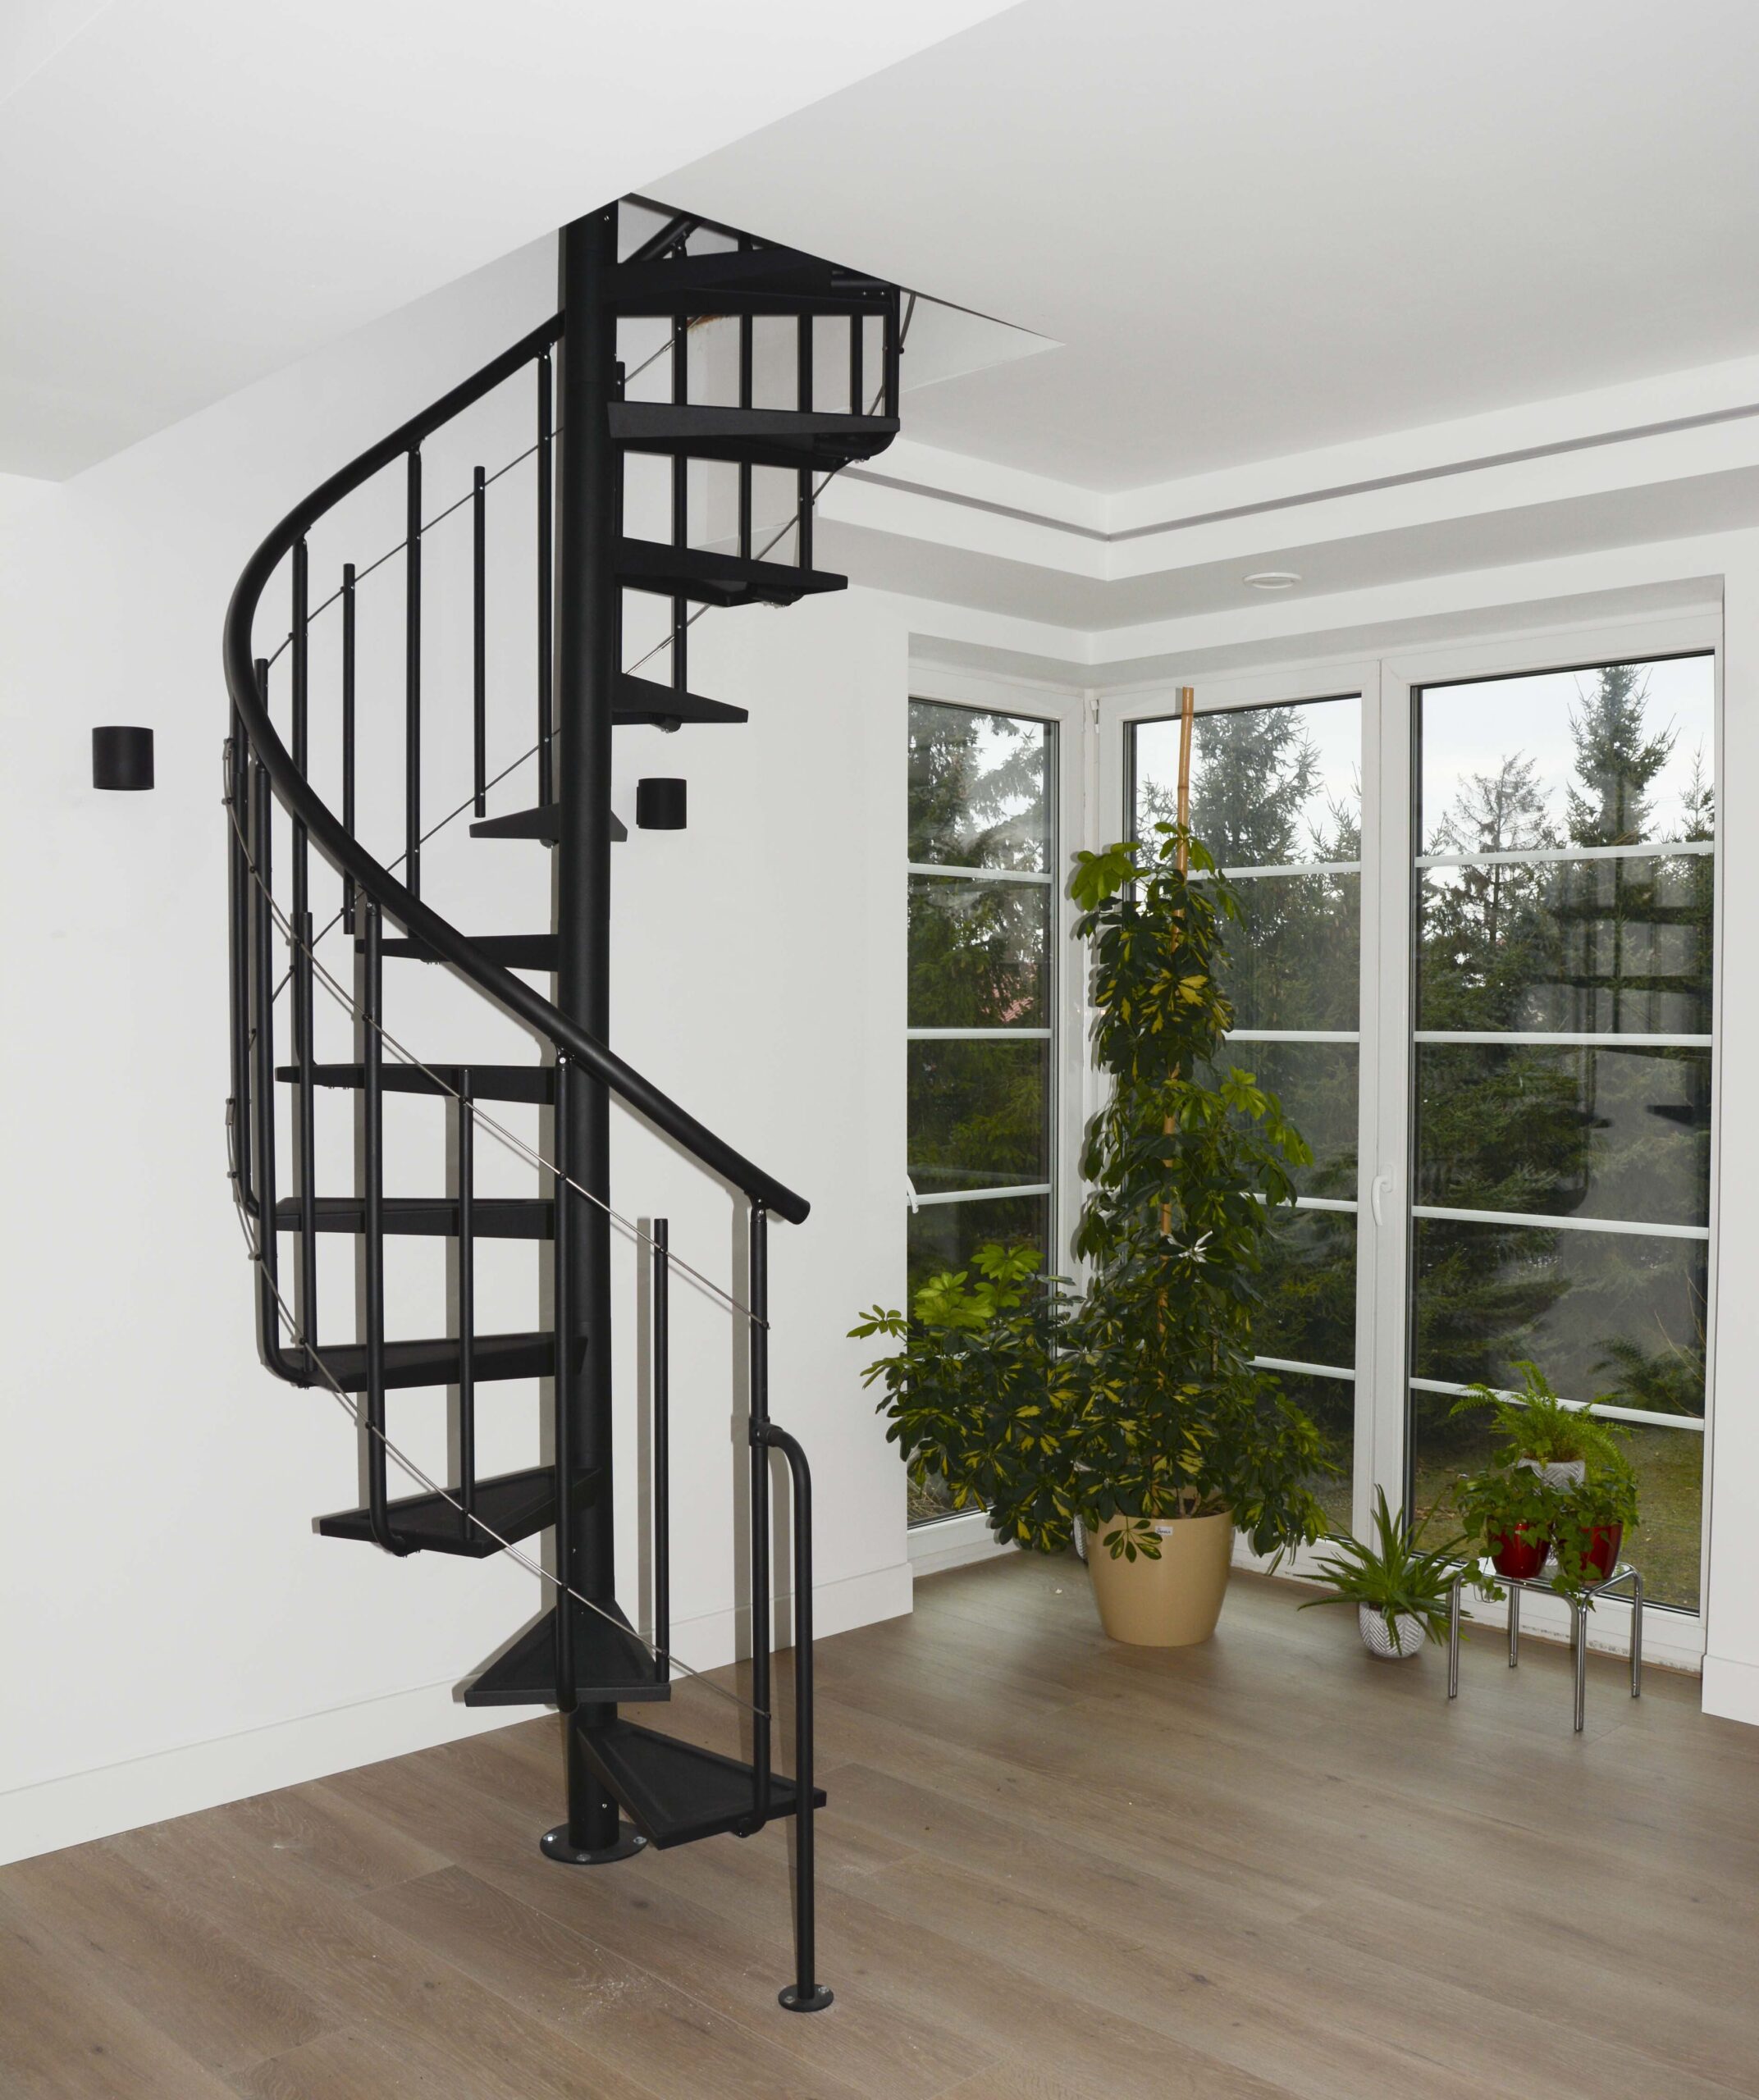 bespoke staircases